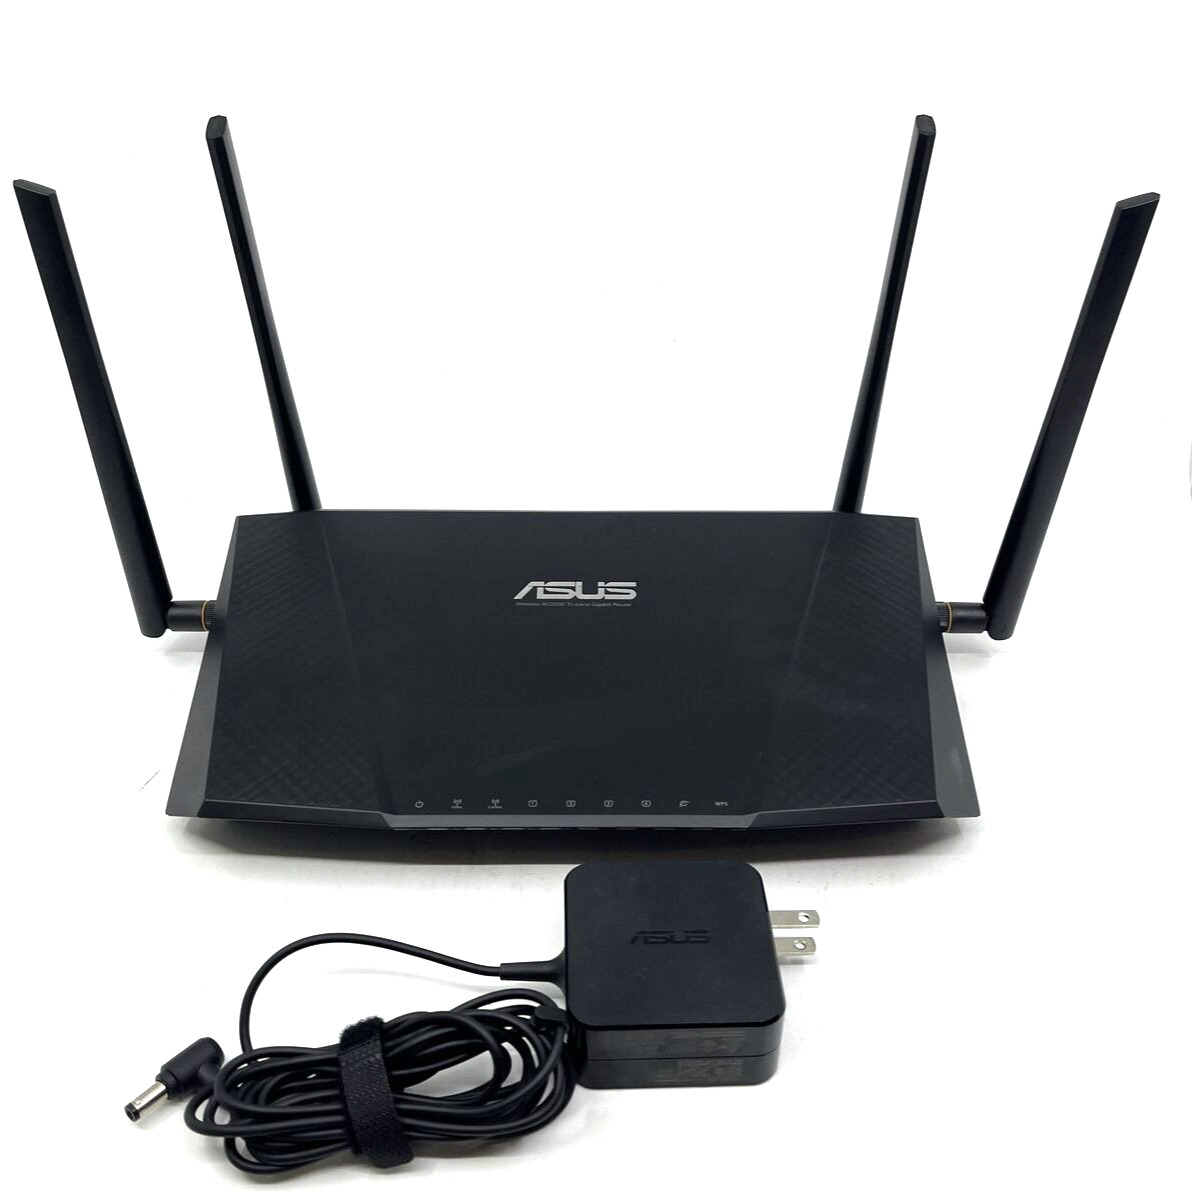 ASUS Router-AC3200 4 Port Tri-Band Wireless Router (RT-AC3200)